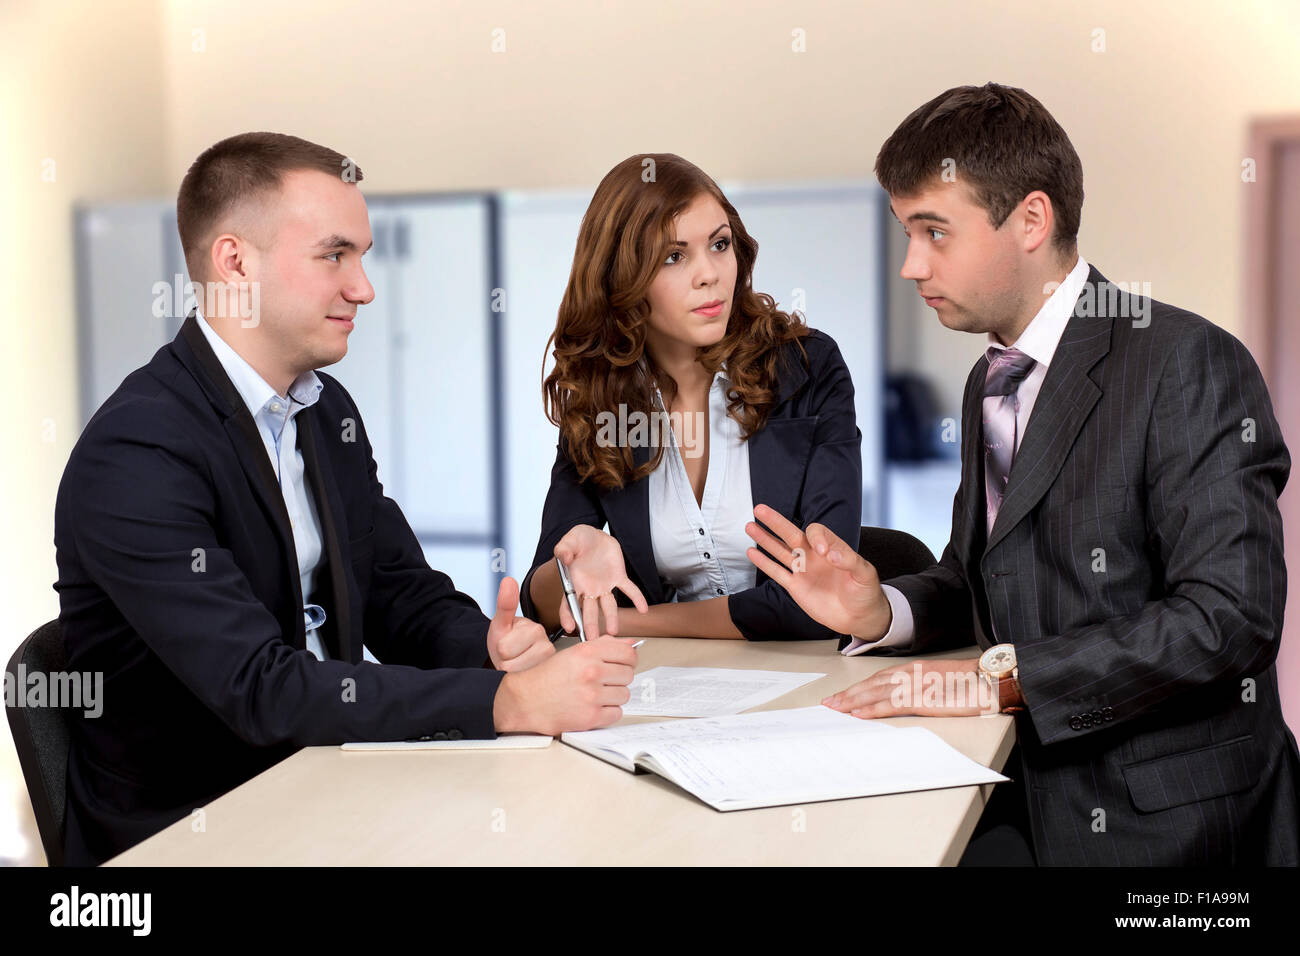 Business negotiations Stock Photo